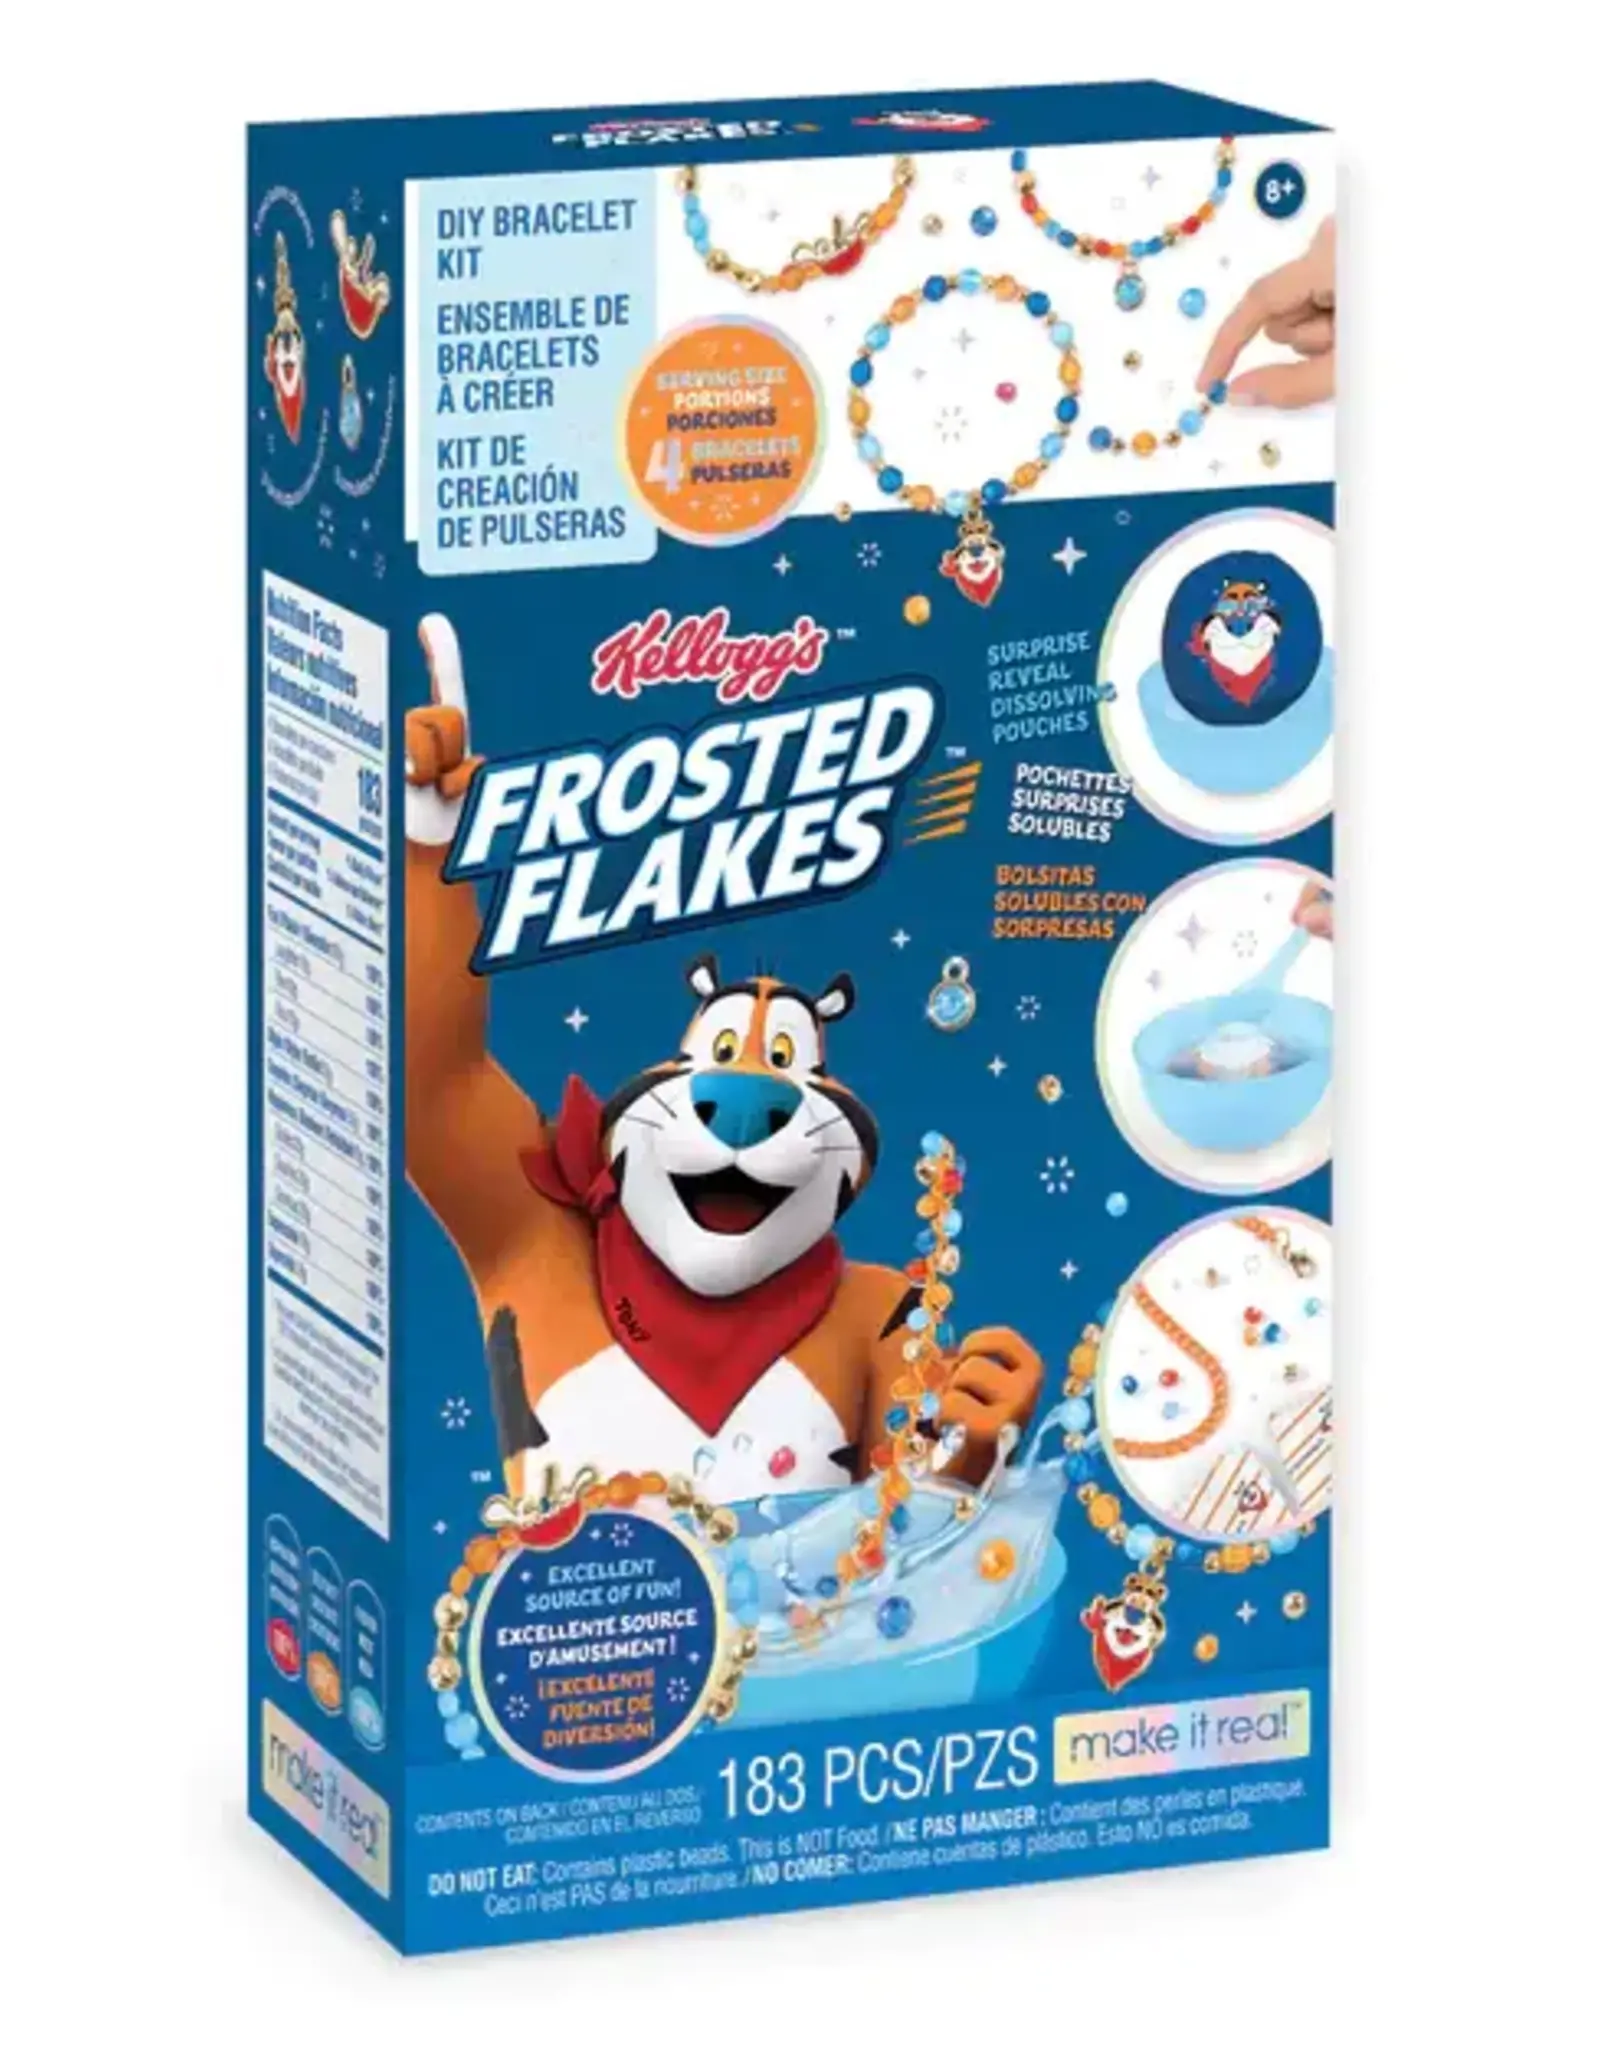 https://cdn.shoplightspeed.com/shops/610037/files/58779699/1600x2048x1/cereal-sly-cute-kelloggs-frosted-flakes.jpg